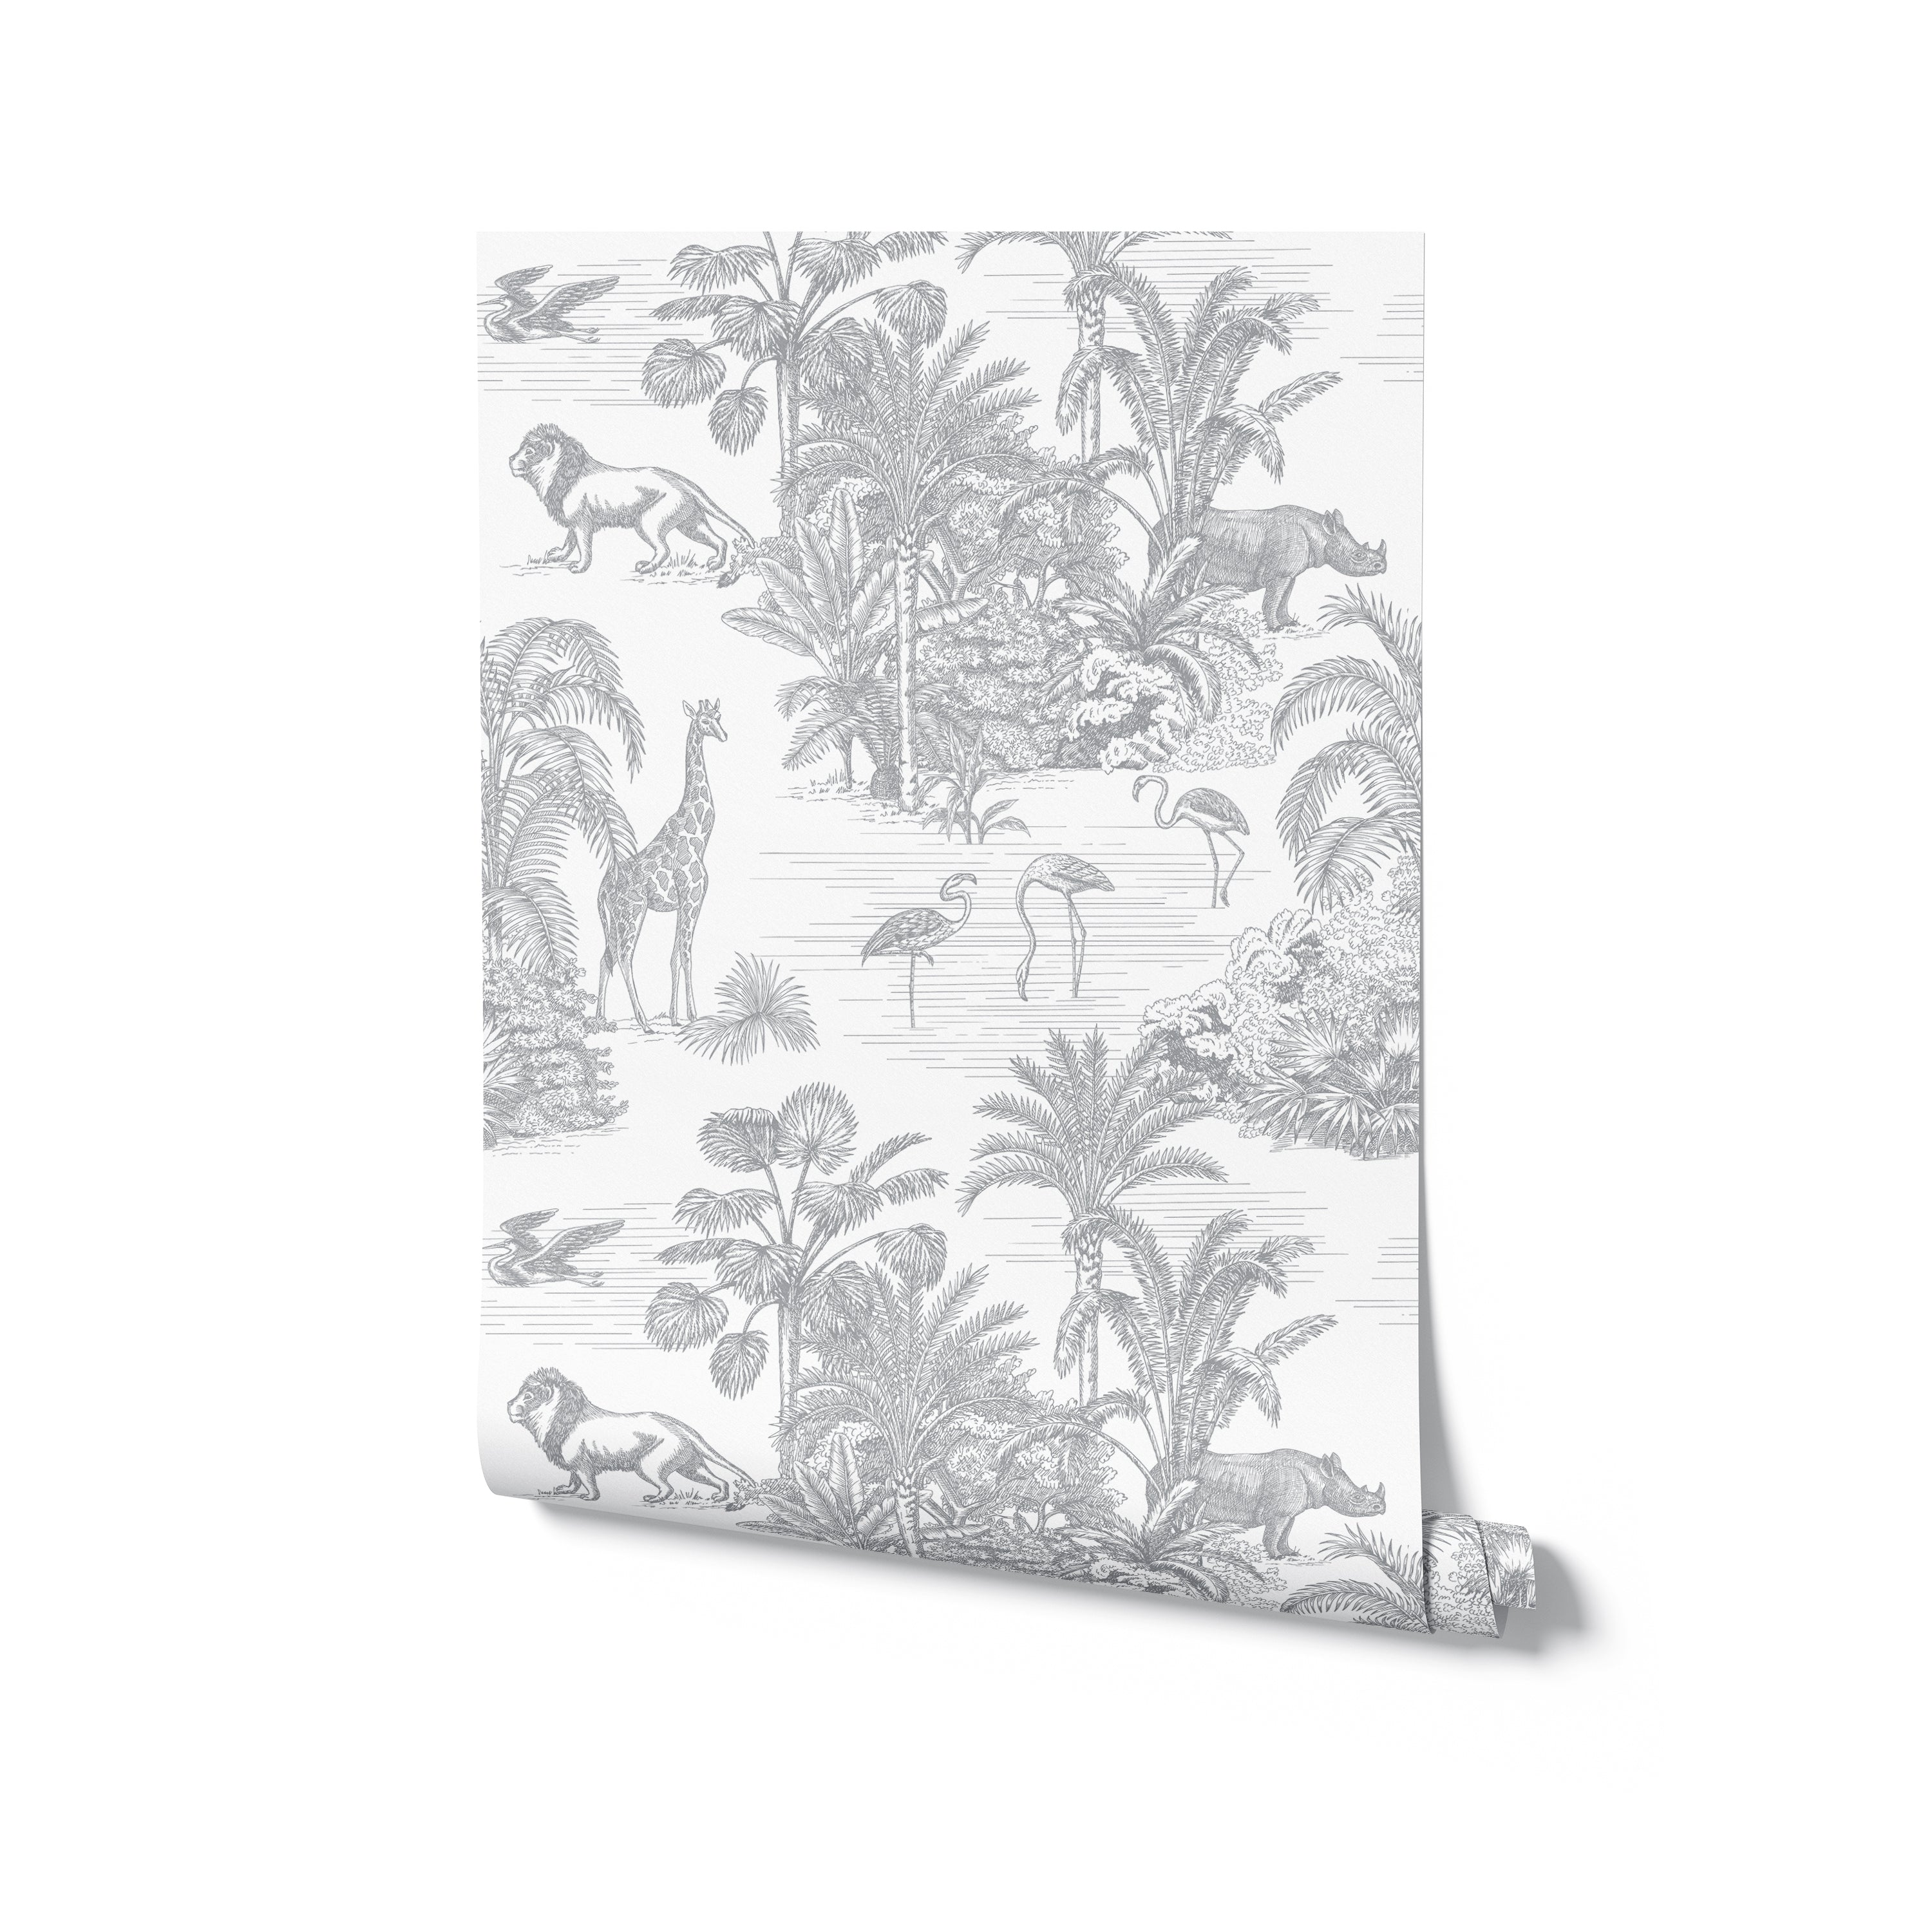 A roll of Jungle Theme Wallpaper unfurled against a white background, showcasing the detailed greyscale illustrations of the jungle's exotic animals and plants. The wallpaper's design is reminiscent of a hand-drawn sketch, perfect for adding a unique and explorative touch to interior spaces.